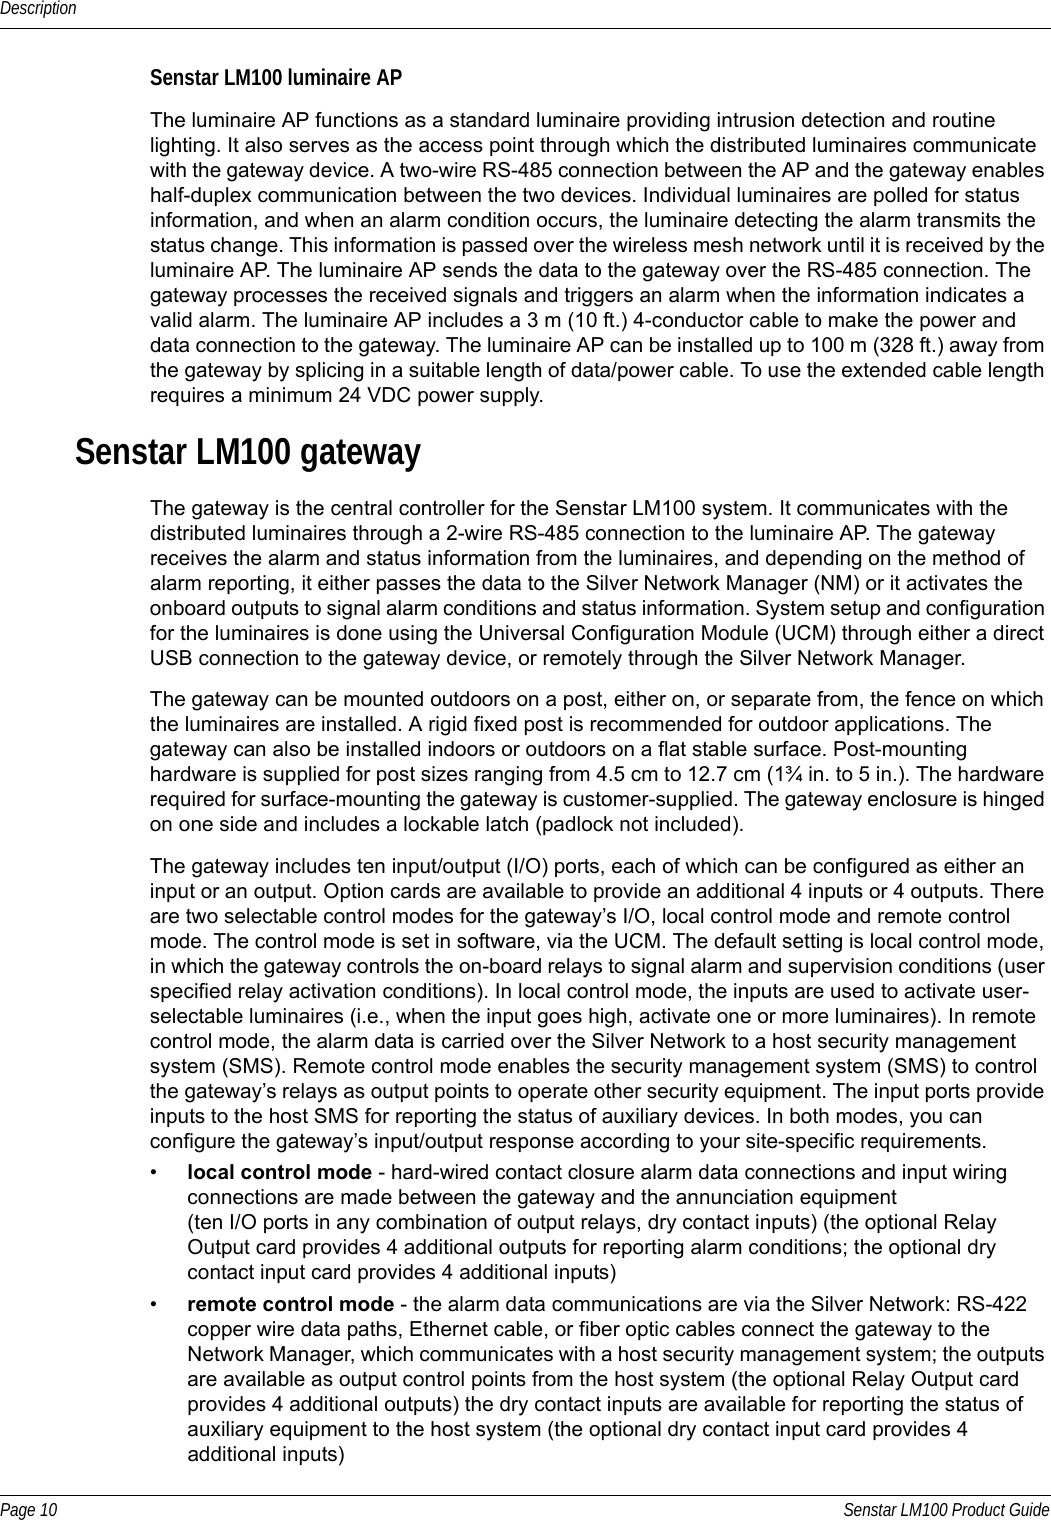 DescriptionPage 10 Senstar LM100 Product GuideSenstar LM100 luminaire APThe luminaire AP functions as a standard luminaire providing intrusion detection and routine lighting. It also serves as the access point through which the distributed luminaires communicate with the gateway device. A two-wire RS-485 connection between the AP and the gateway enables half-duplex communication between the two devices. Individual luminaires are polled for status information, and when an alarm condition occurs, the luminaire detecting the alarm transmits the status change. This information is passed over the wireless mesh network until it is received by the luminaire AP. The luminaire AP sends the data to the gateway over the RS-485 connection. The gateway processes the received signals and triggers an alarm when the information indicates a valid alarm. The luminaire AP includes a 3 m (10 ft.) 4-conductor cable to make the power and data connection to the gateway. The luminaire AP can be installed up to 100 m (328 ft.) away from the gateway by splicing in a suitable length of data/power cable. To use the extended cable length requires a minimum 24 VDC power supply.Senstar LM100 gatewayThe gateway is the central controller for the Senstar LM100 system. It communicates with the distributed luminaires through a 2-wire RS-485 connection to the luminaire AP. The gateway receives the alarm and status information from the luminaires, and depending on the method of alarm reporting, it either passes the data to the Silver Network Manager (NM) or it activates the onboard outputs to signal alarm conditions and status information. System setup and configuration for the luminaires is done using the Universal Configuration Module (UCM) through either a direct USB connection to the gateway device, or remotely through the Silver Network Manager.The gateway can be mounted outdoors on a post, either on, or separate from, the fence on which the luminaires are installed. A rigid fixed post is recommended for outdoor applications. The gateway can also be installed indoors or outdoors on a flat stable surface. Post-mounting hardware is supplied for post sizes ranging from 4.5 cm to 12.7 cm (1¾ in. to 5 in.). The hardware required for surface-mounting the gateway is customer-supplied. The gateway enclosure is hinged on one side and includes a lockable latch (padlock not included).The gateway includes ten input/output (I/O) ports, each of which can be configured as either an input or an output. Option cards are available to provide an additional 4 inputs or 4 outputs. There are two selectable control modes for the gateway’s I/O, local control mode and remote control mode. The control mode is set in software, via the UCM. The default setting is local control mode, in which the gateway controls the on-board relays to signal alarm and supervision conditions (user specified relay activation conditions). In local control mode, the inputs are used to activate user-selectable luminaires (i.e., when the input goes high, activate one or more luminaires). In remote control mode, the alarm data is carried over the Silver Network to a host security management system (SMS). Remote control mode enables the security management system (SMS) to control the gateway’s relays as output points to operate other security equipment. The input ports provide inputs to the host SMS for reporting the status of auxiliary devices. In both modes, you can configure the gateway’s input/output response according to your site-specific requirements.•local control mode - hard-wired contact closure alarm data connections and input wiring connections are made between the gateway and the annunciation equipment (ten I/O ports in any combination of output relays, dry contact inputs) (the optional Relay Output card provides 4 additional outputs for reporting alarm conditions; the optional dry contact input card provides 4 additional inputs)•remote control mode - the alarm data communications are via the Silver Network: RS-422 copper wire data paths, Ethernet cable, or fiber optic cables connect the gateway to the Network Manager, which communicates with a host security management system; the outputs are available as output control points from the host system (the optional Relay Output card provides 4 additional outputs) the dry contact inputs are available for reporting the status of auxiliary equipment to the host system (the optional dry contact input card provides 4 additional inputs) 